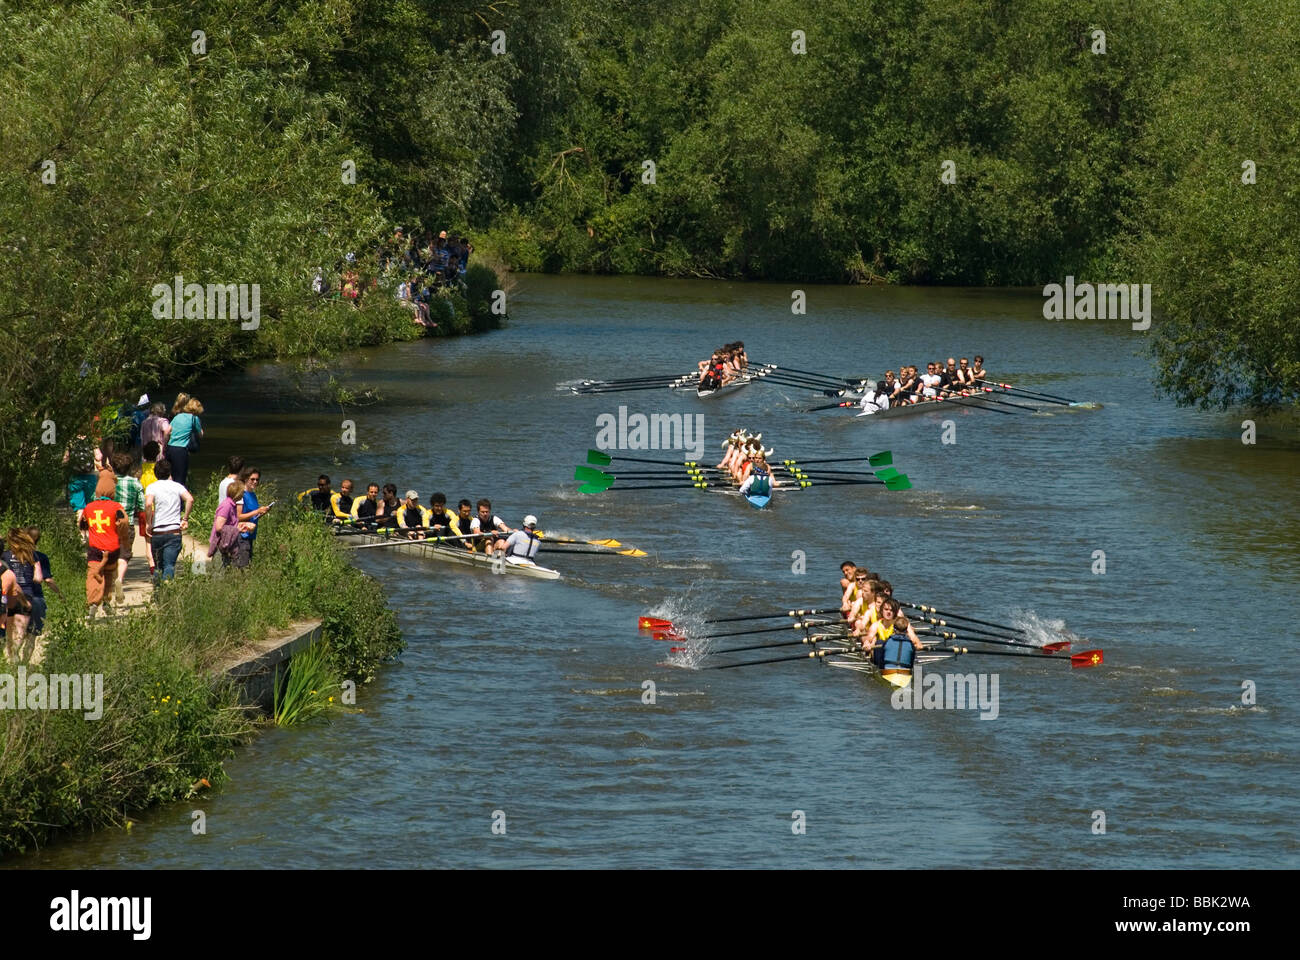 Oxford University Rowing Clubs Eights Week Rowing Race sul Fiume Isis attualmente fiume Tamigi in Oxford Oxfordshire 2009 2000 HOMER SYKES Foto Stock